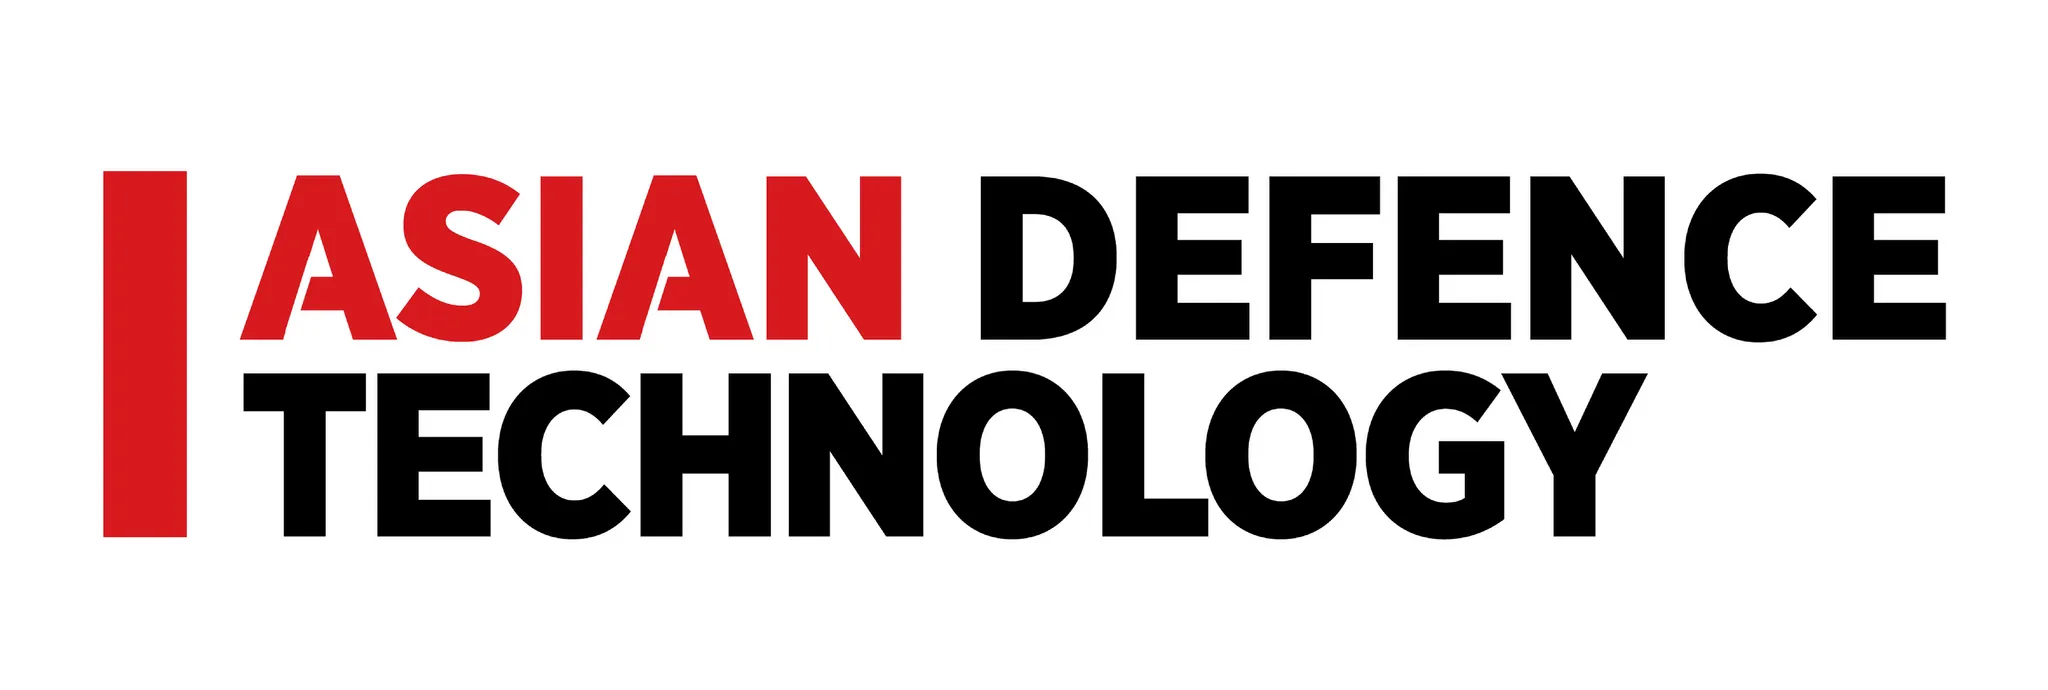 Asian Defence Technology